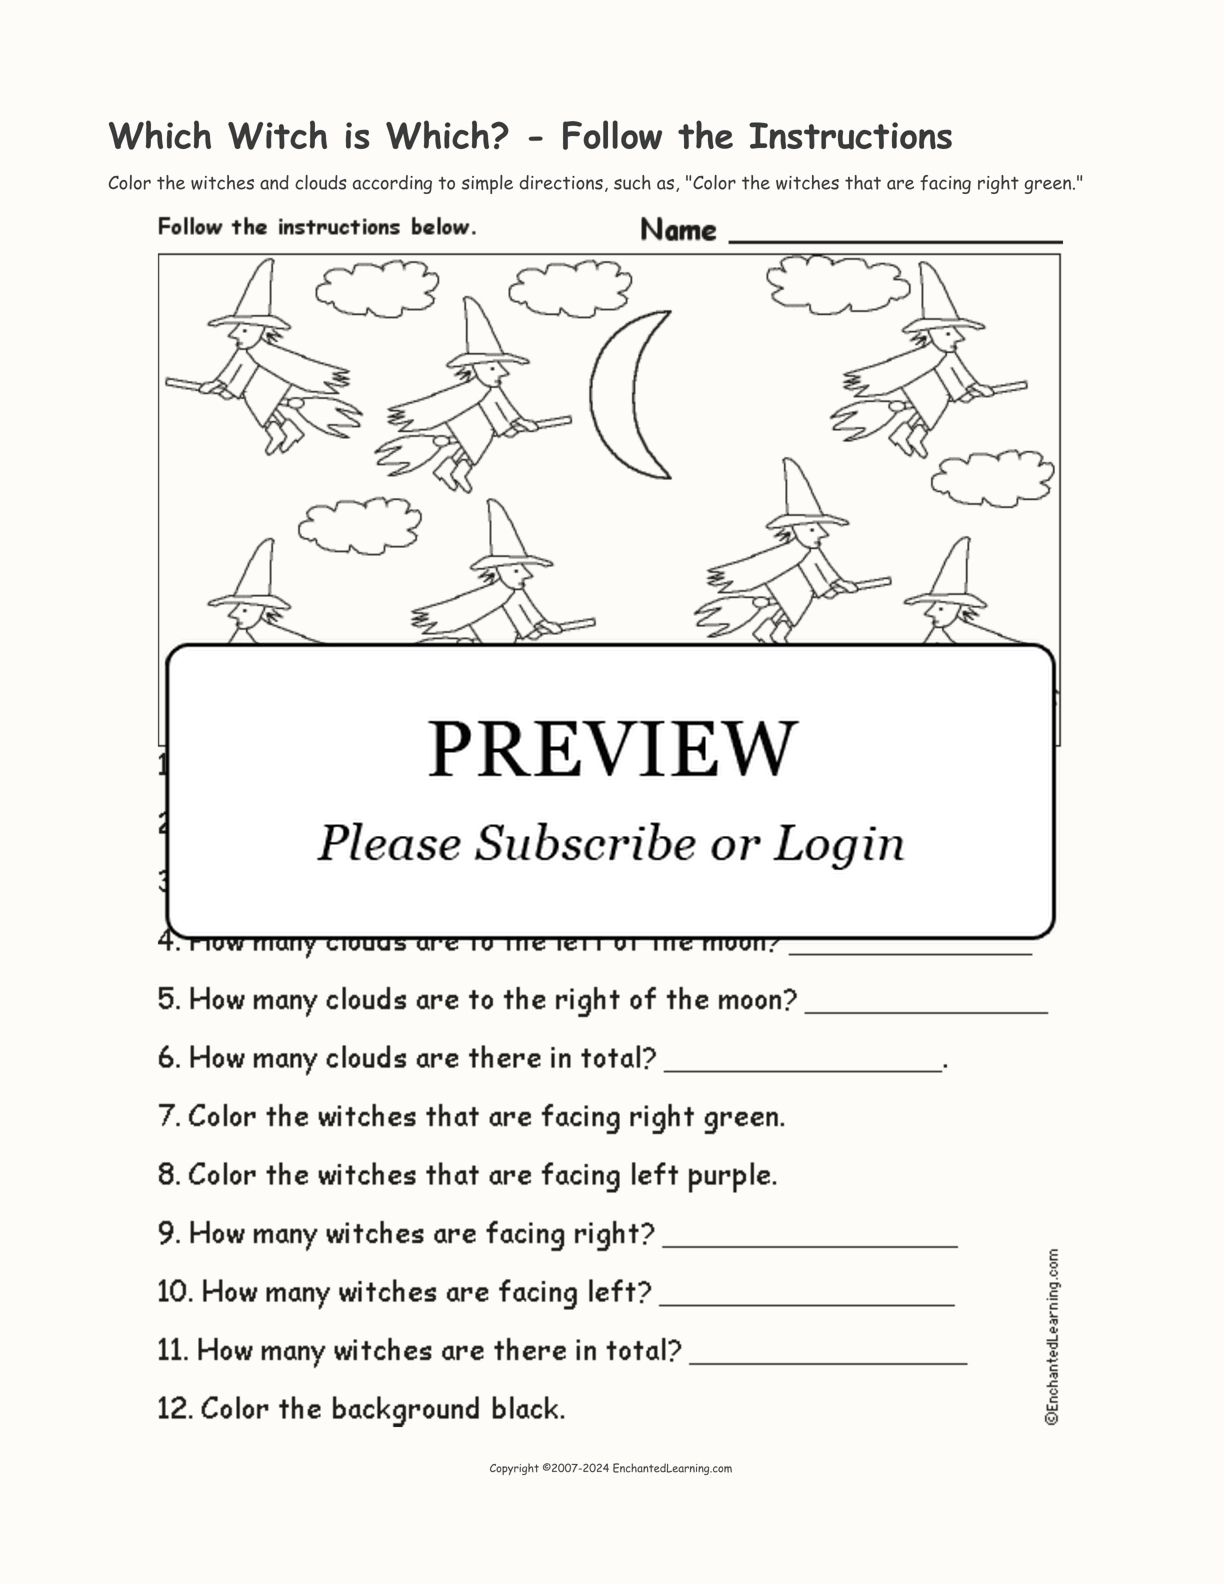 Which Witch is Which? - Follow the Instructions interactive worksheet page 1